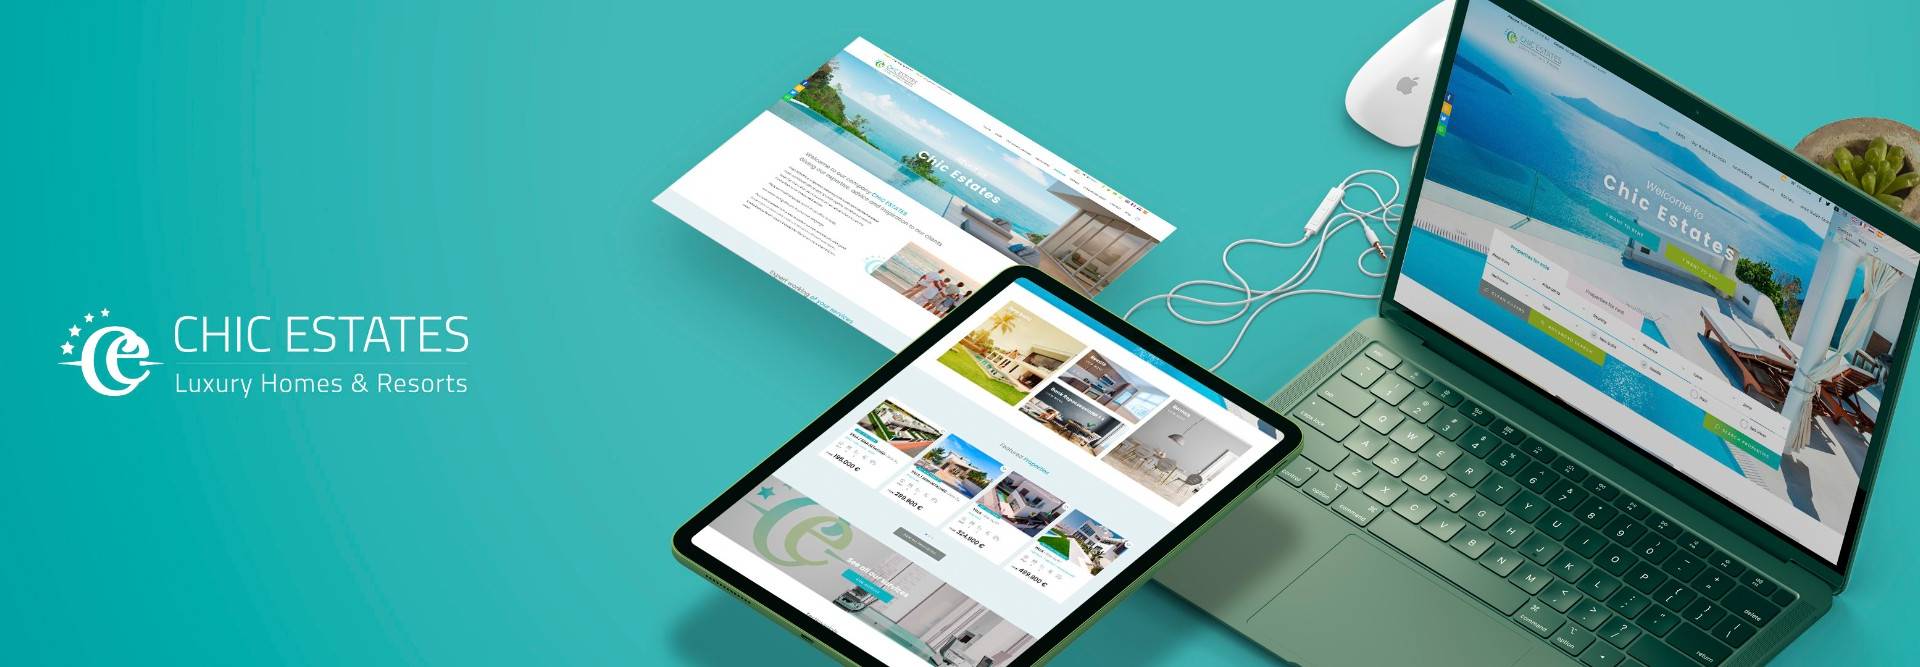 Have you seen the big makeover of Chic Estates? Mediaelx transforms its real estate website into a more modern and visual one.